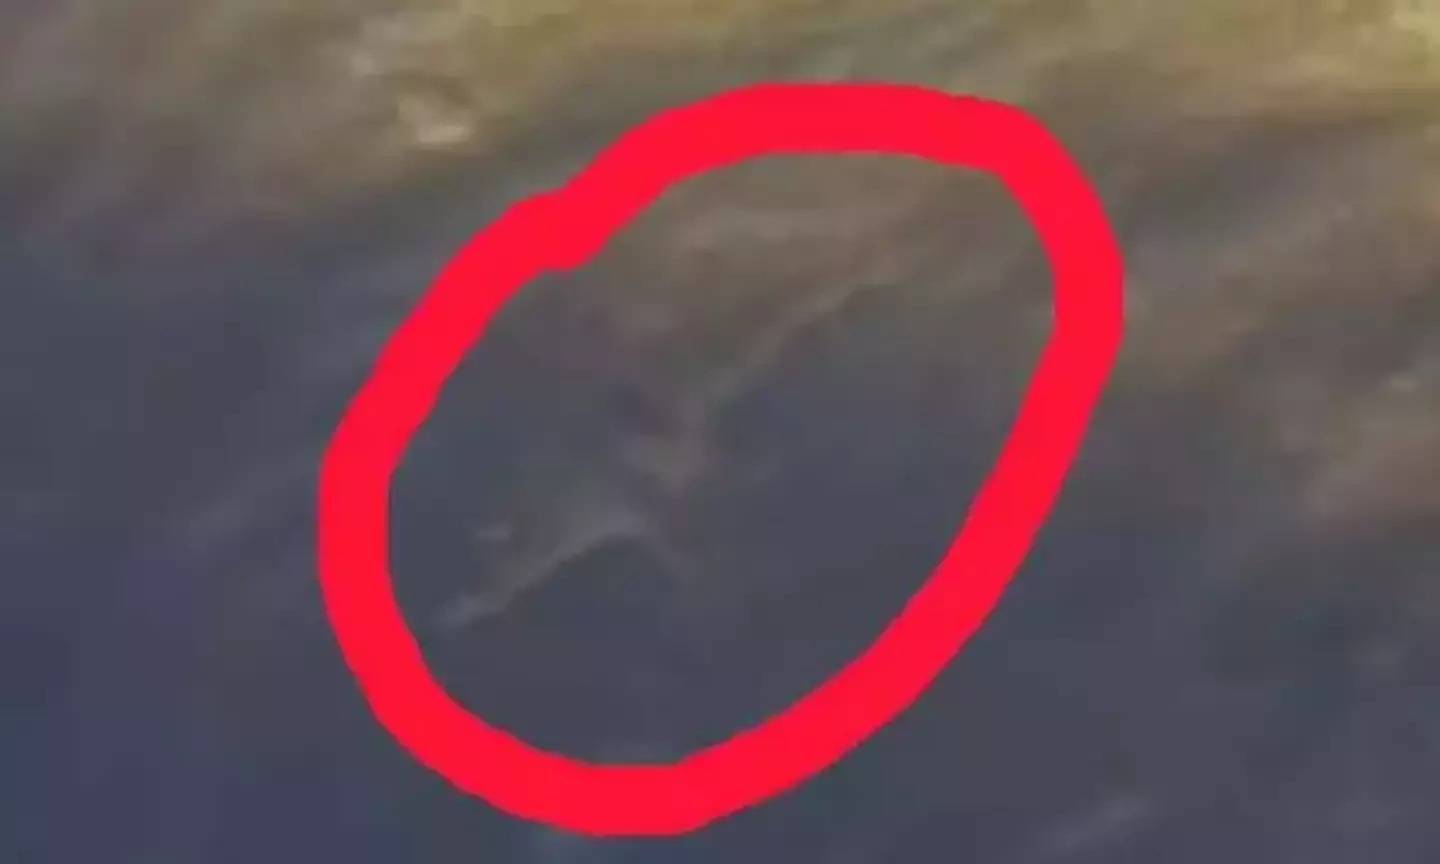 The clip appears to show the mythical beast on the shoreline.